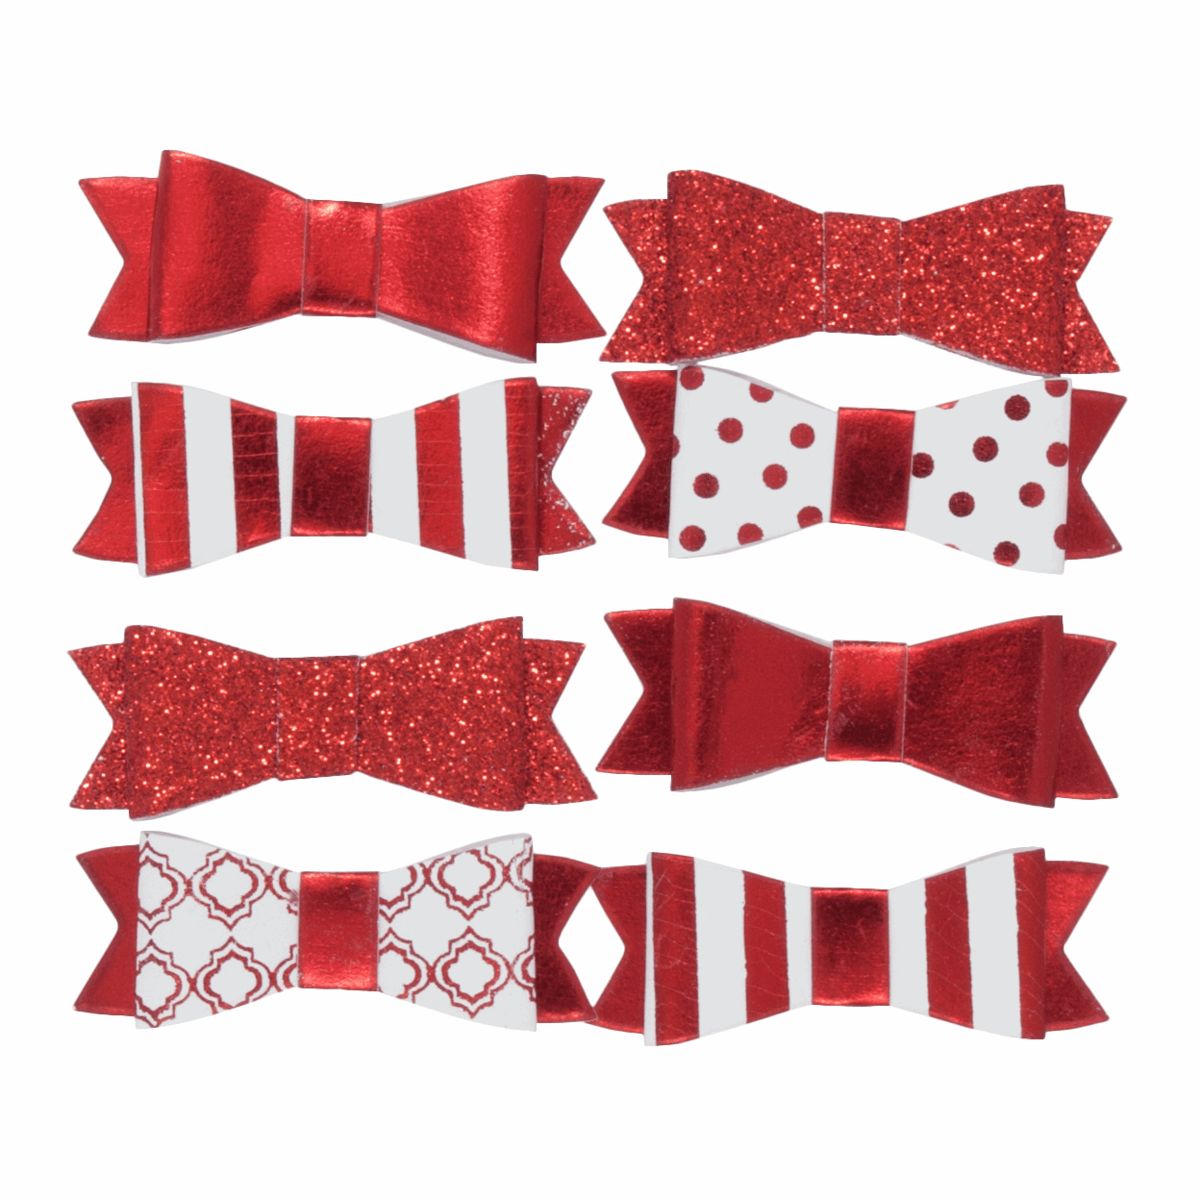 Trimits Craft Embellishments - Metallic Red Bows (Pack of 8)